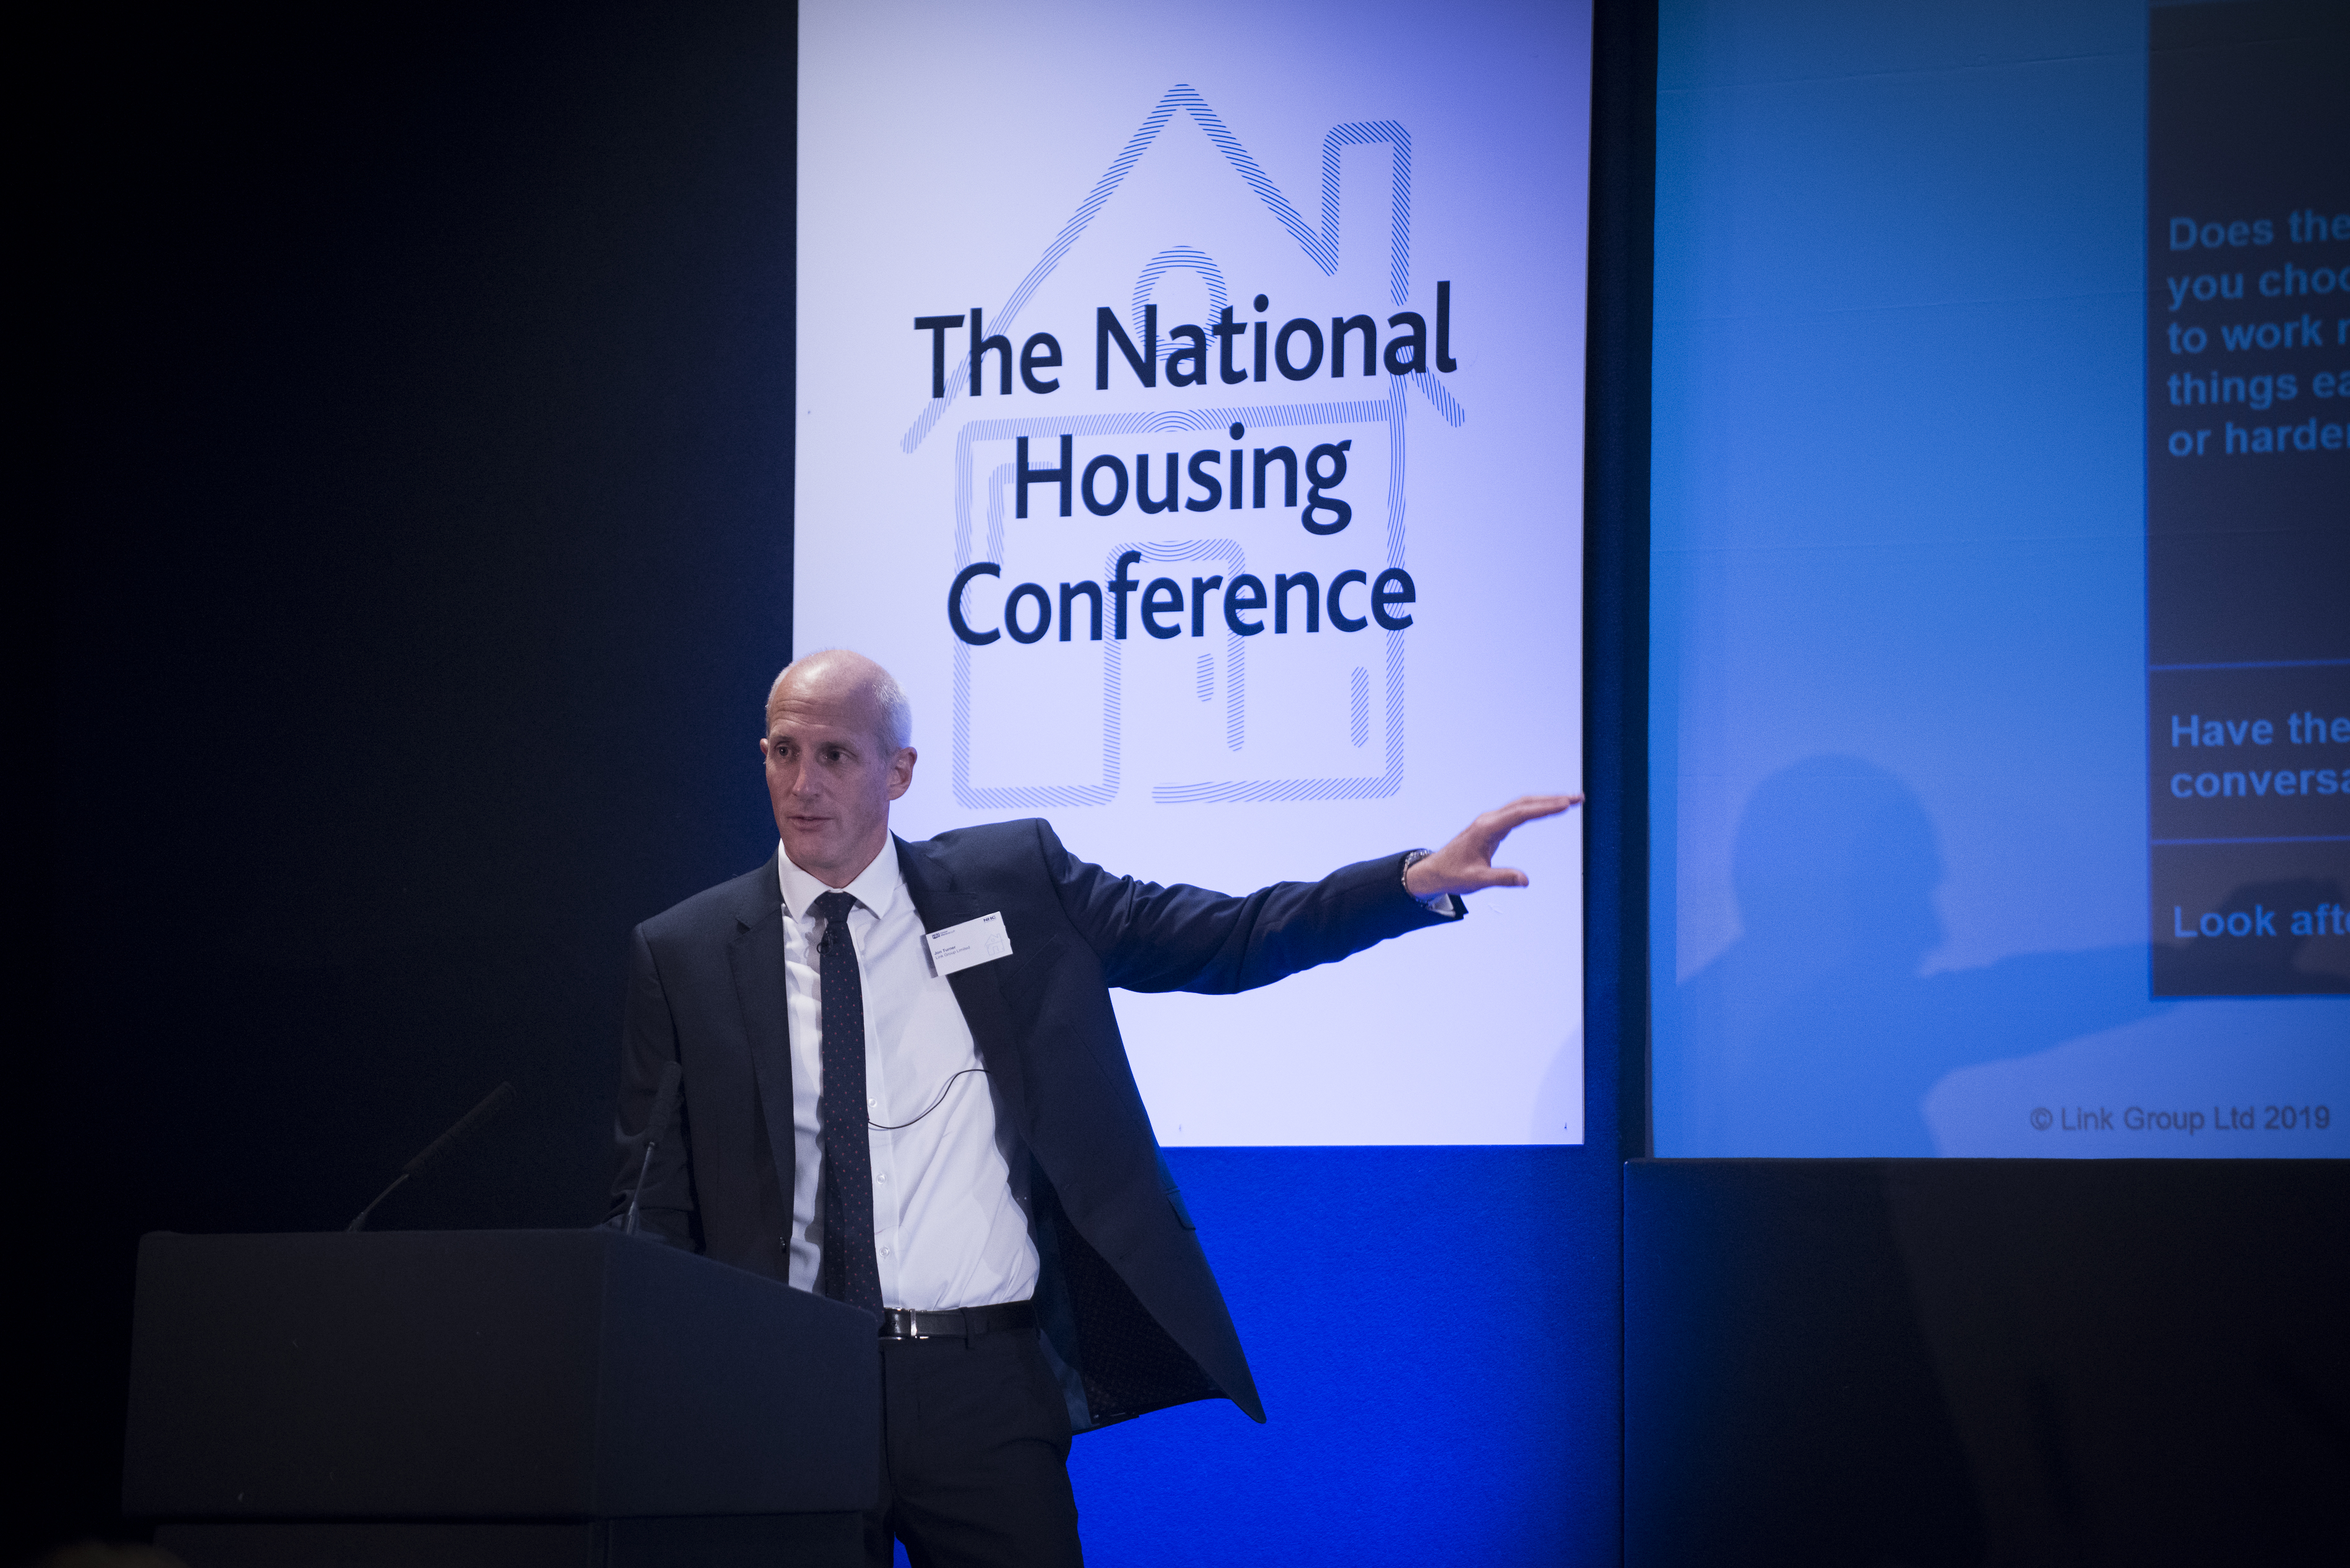 Social housing sector must 'think radically' to be ready for a new age, conference told